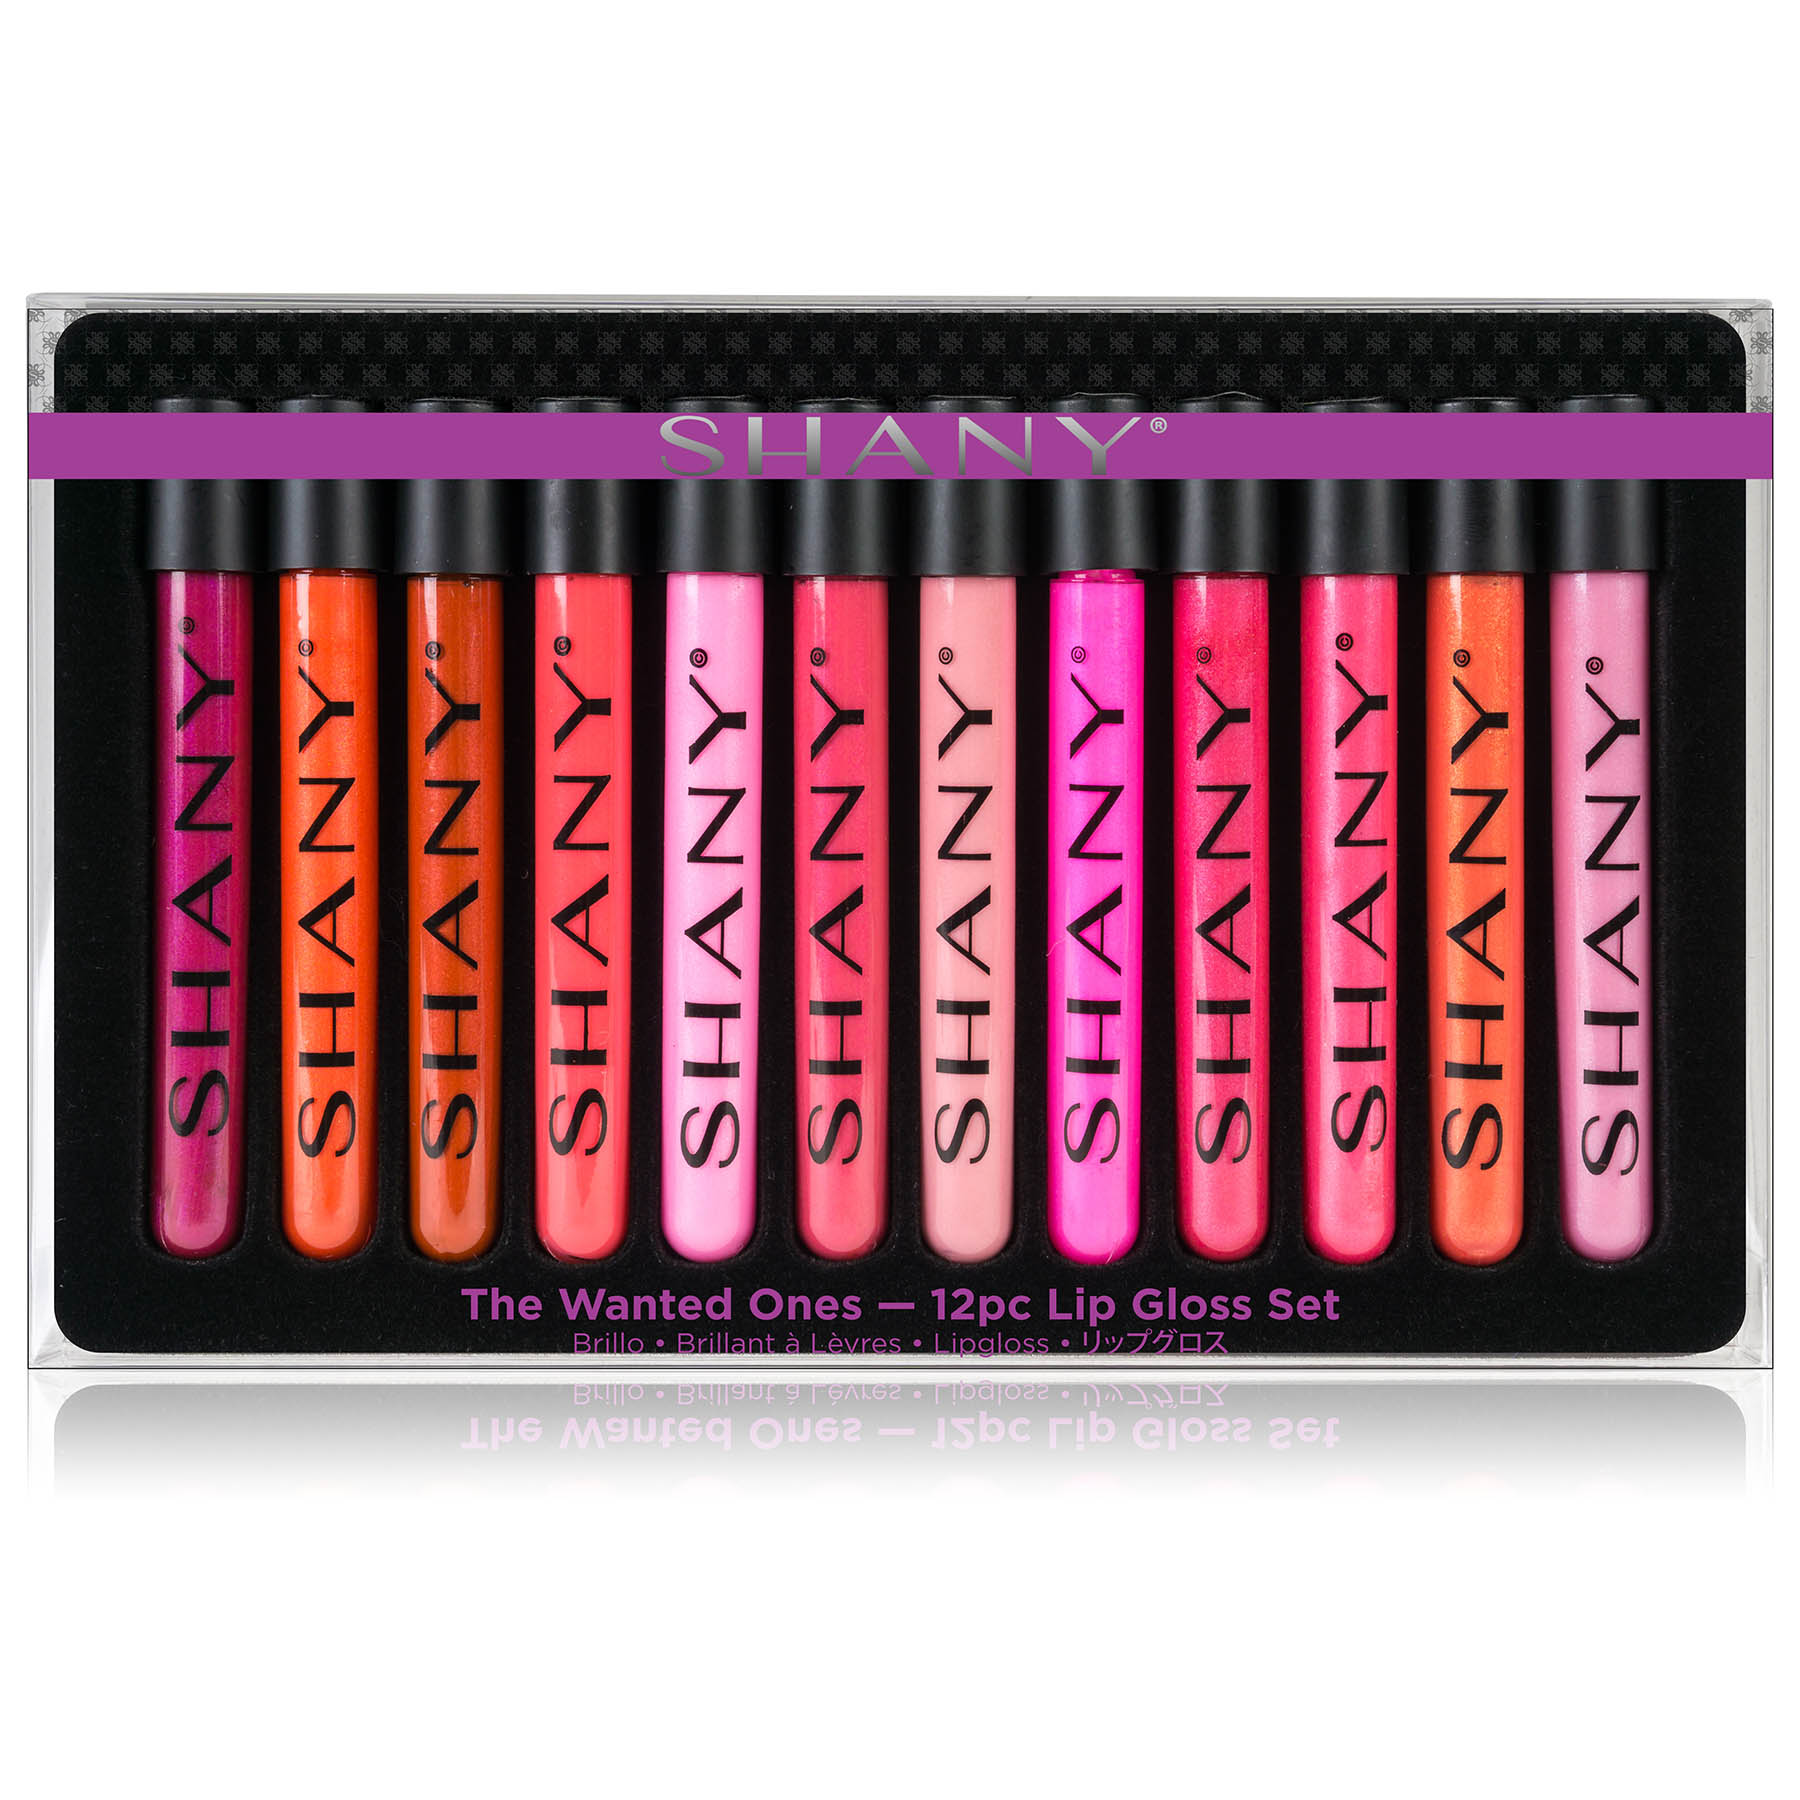 SHANY The Wanted Ones - 12 Piece Lip Gloss Set with Aloe Vera and Vitamin E - image 1 of 5